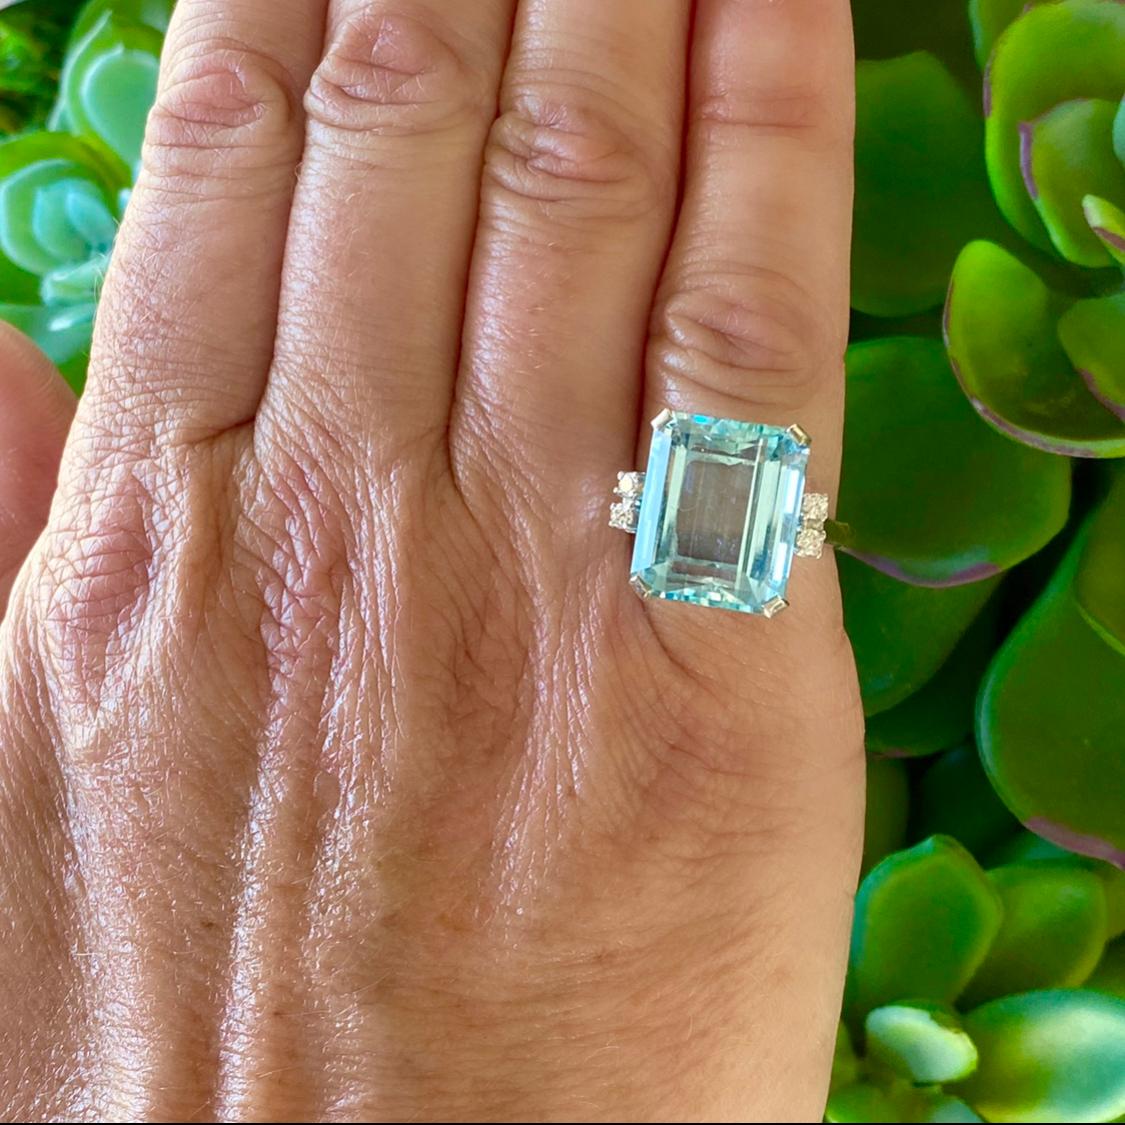 Enjoy the uplifting color of this sky blue aquamarine ring! The 14k white gold highlights this rectangular-cur aqua, weighing approximately 9.50 carats, accented by four round brilliant-cut diamonds totaling 0.12-ct. The ring wighs 7.0 grams, and is